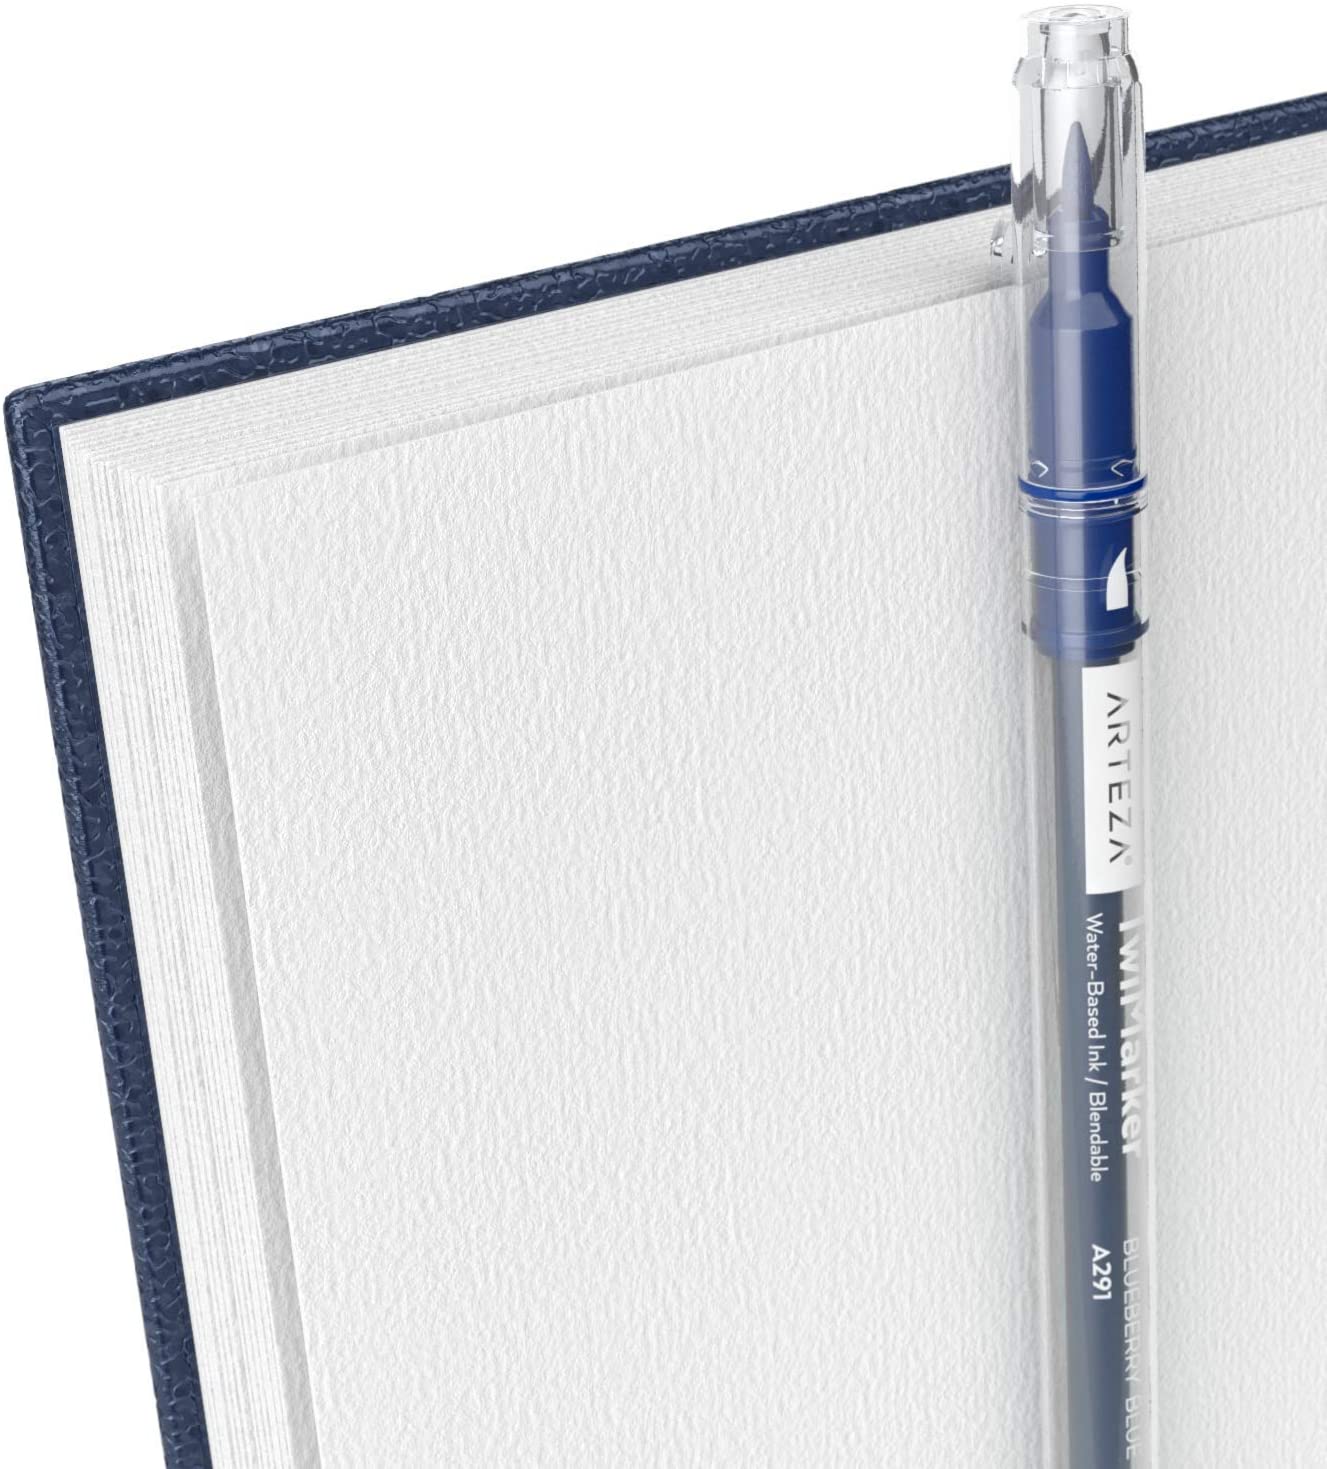 Watercolor Book, Spiral-Bound Hardcover, Blue, 5.5" x 8.5” - Pack of 3